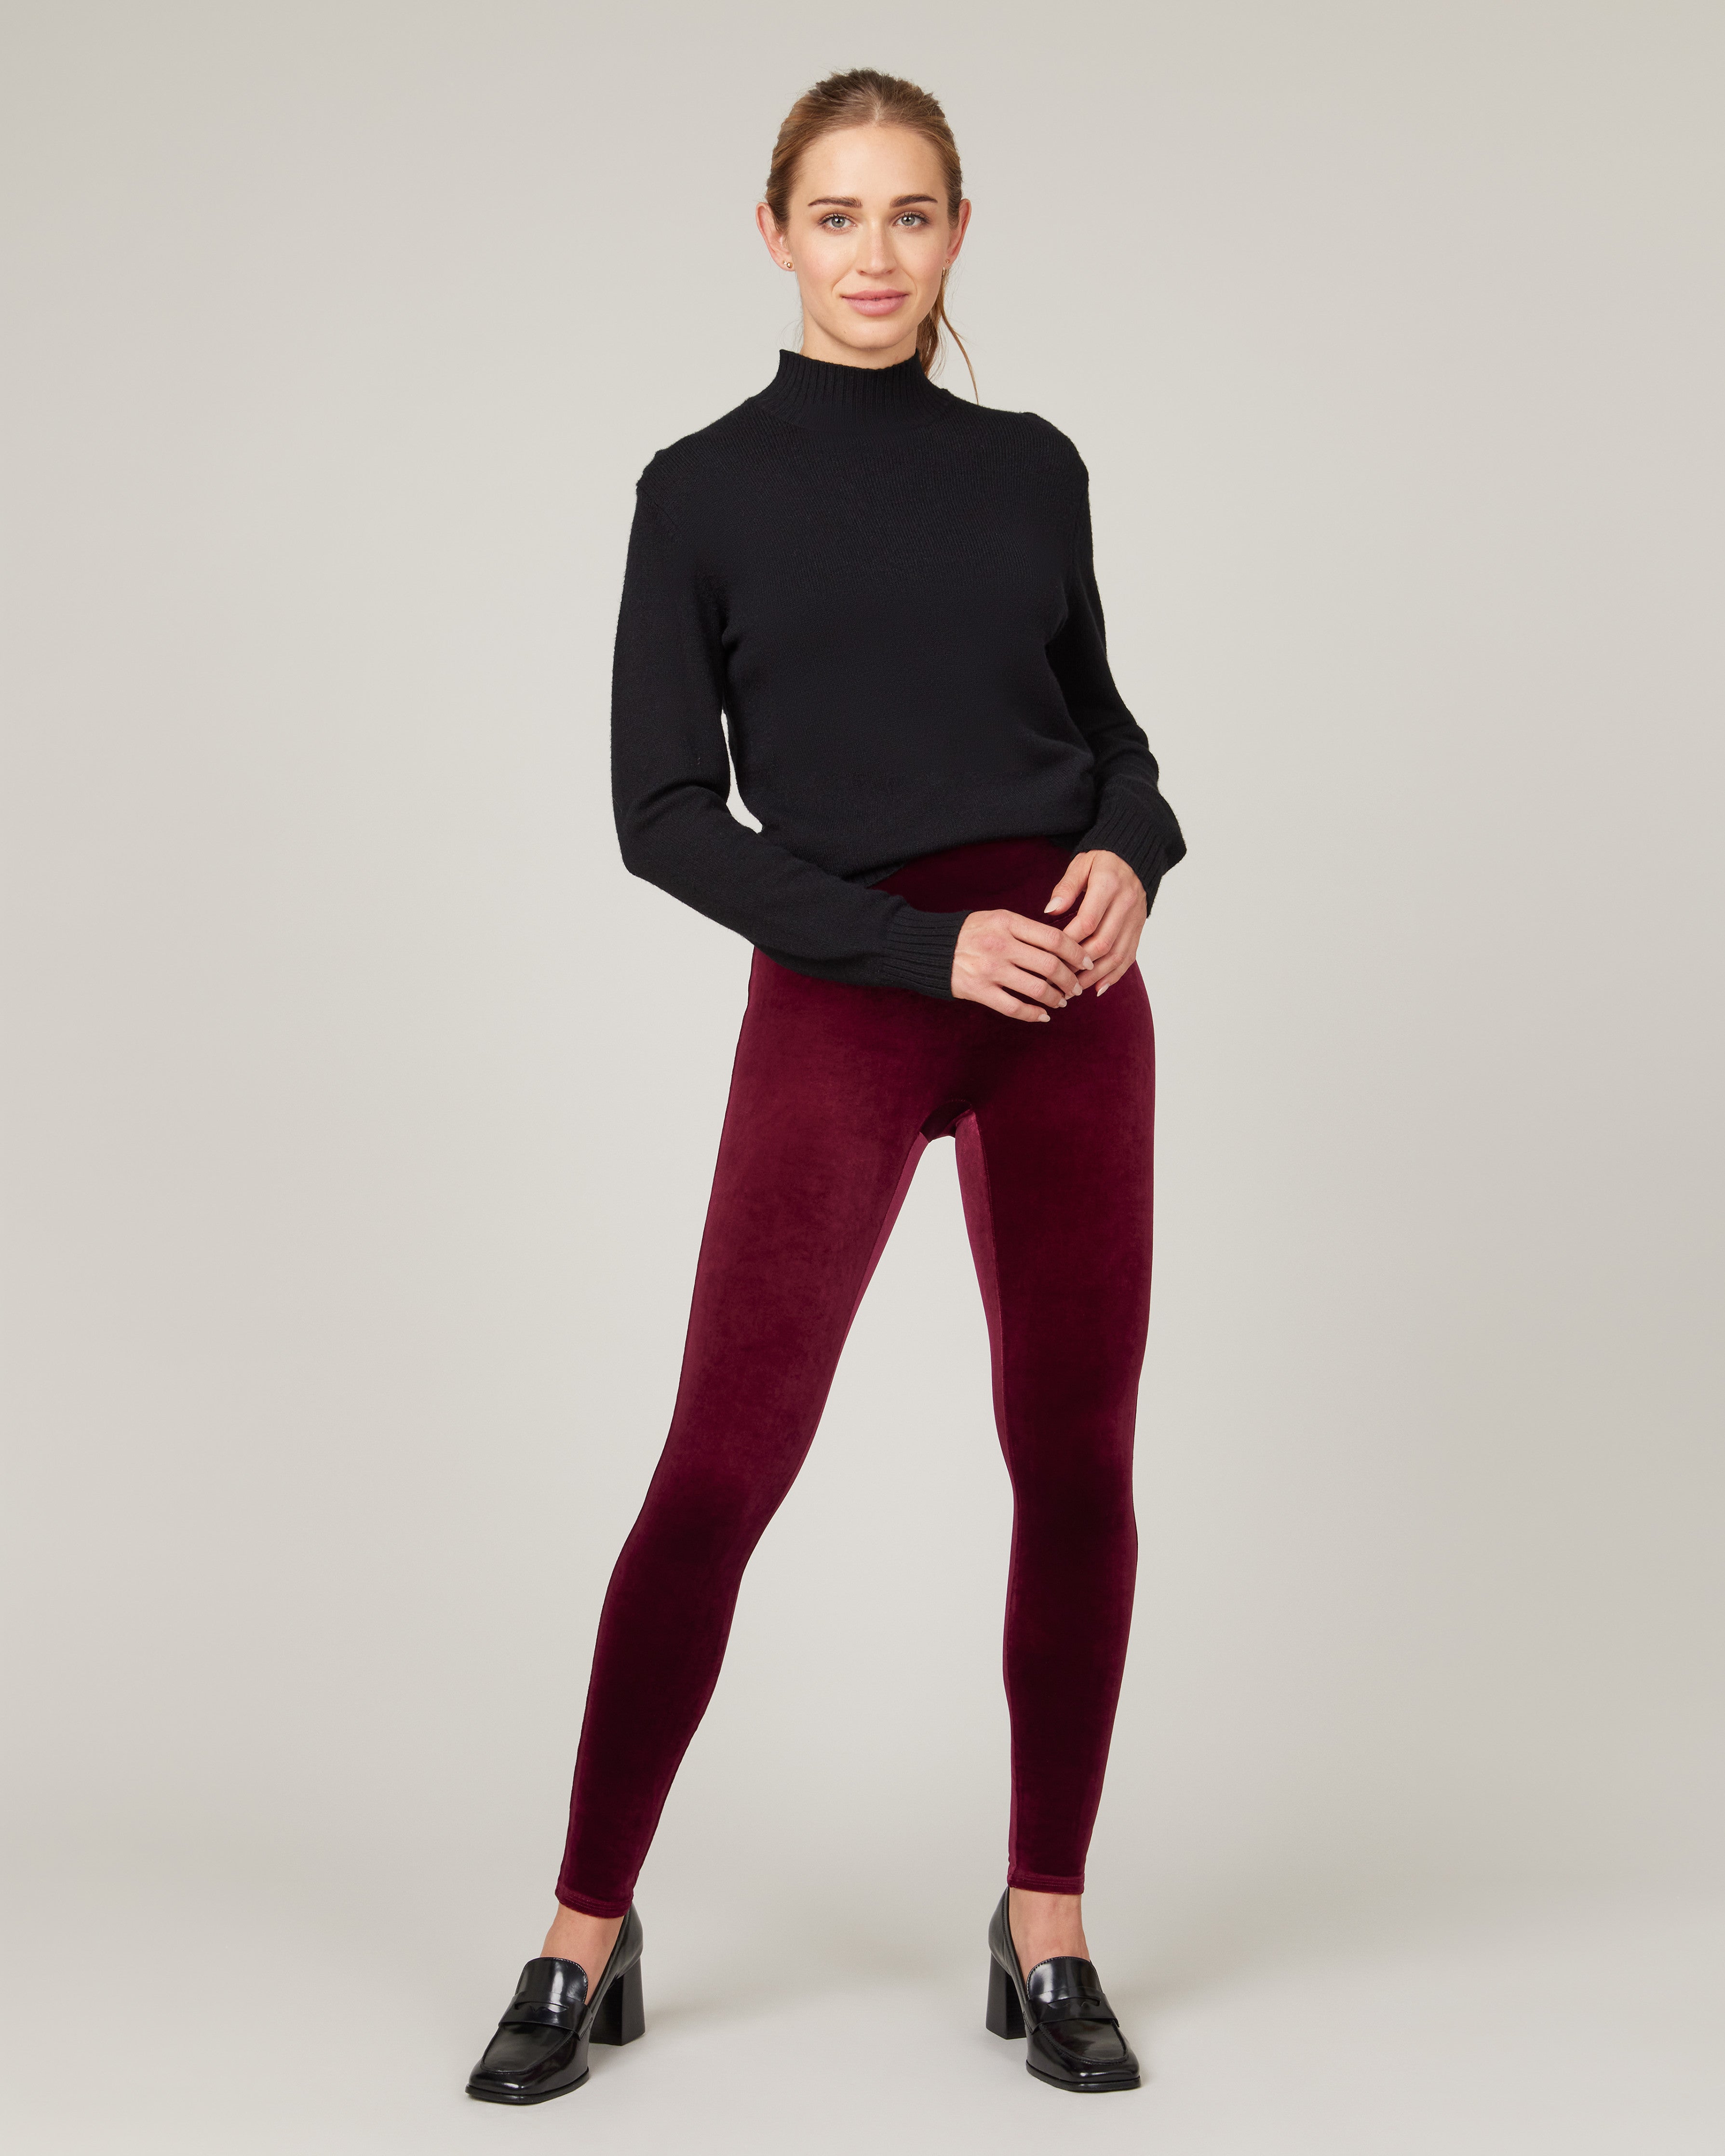 Spanx Velvet leggings-8 - 50 IS NOT OLD - A Fashion And Beauty Blog For  Women Over 50